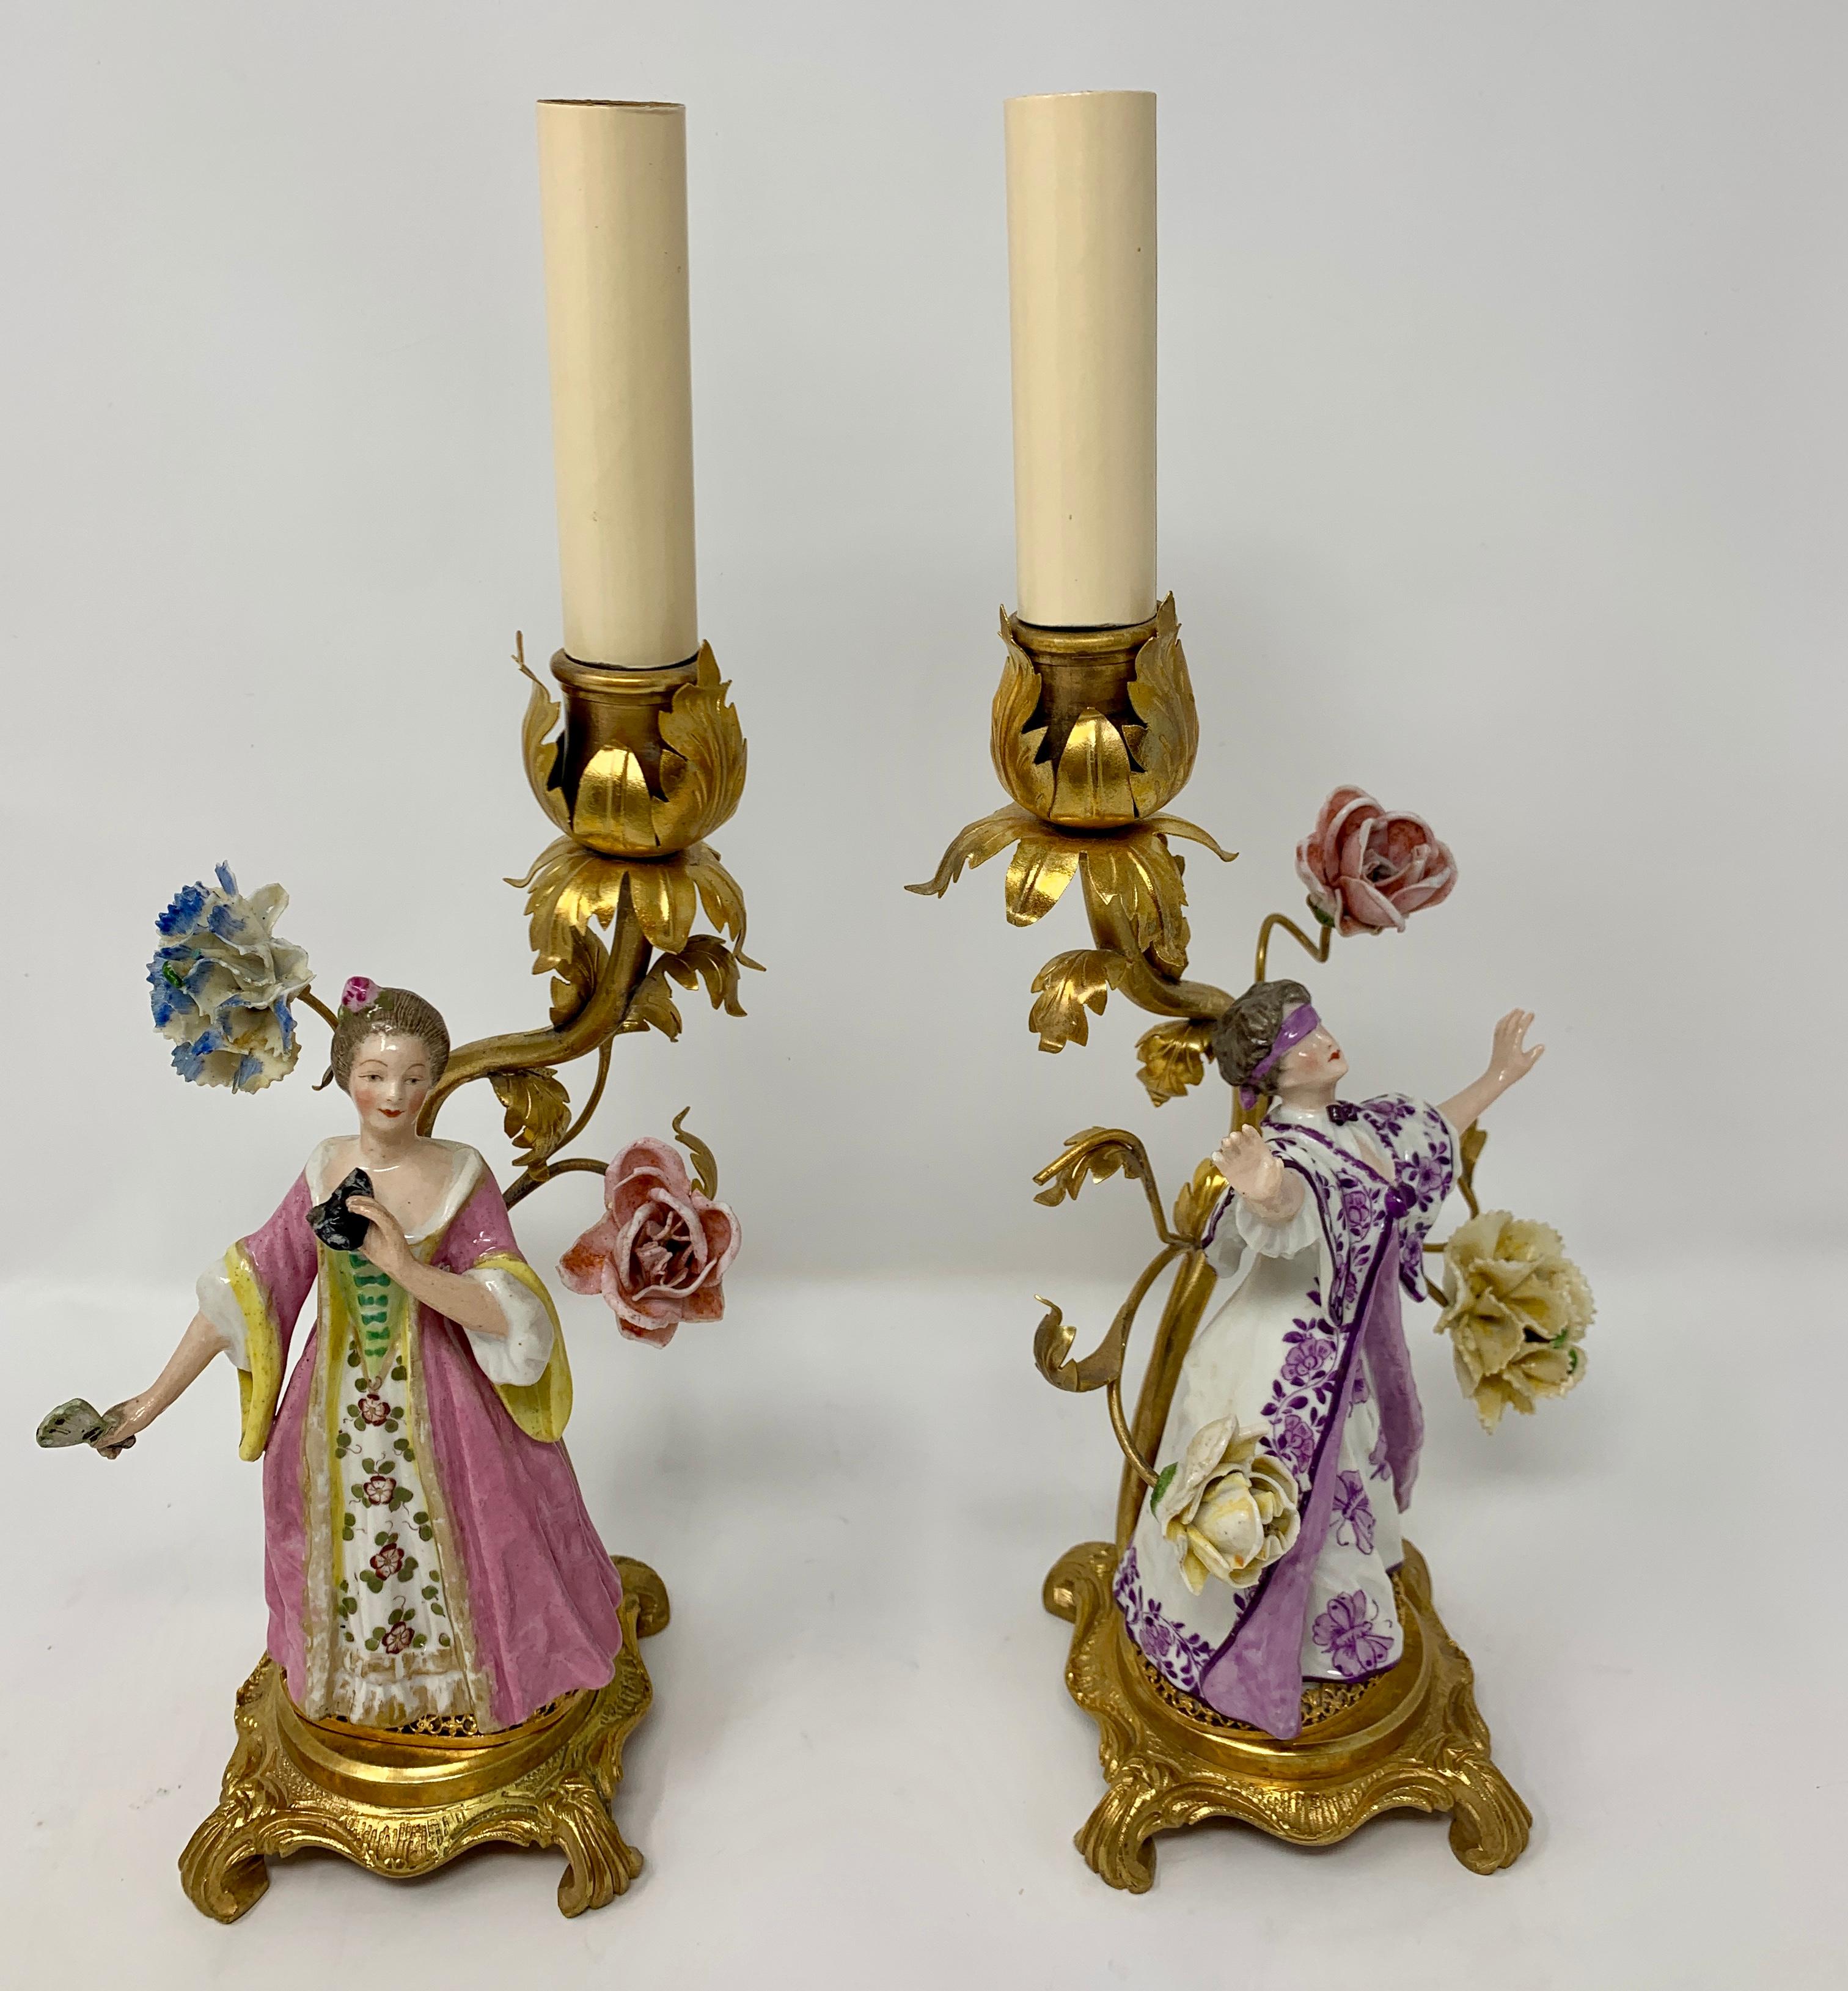 Pair of antique delicate porcelain figurine candlesticks with flowers. Charming and very lovely.